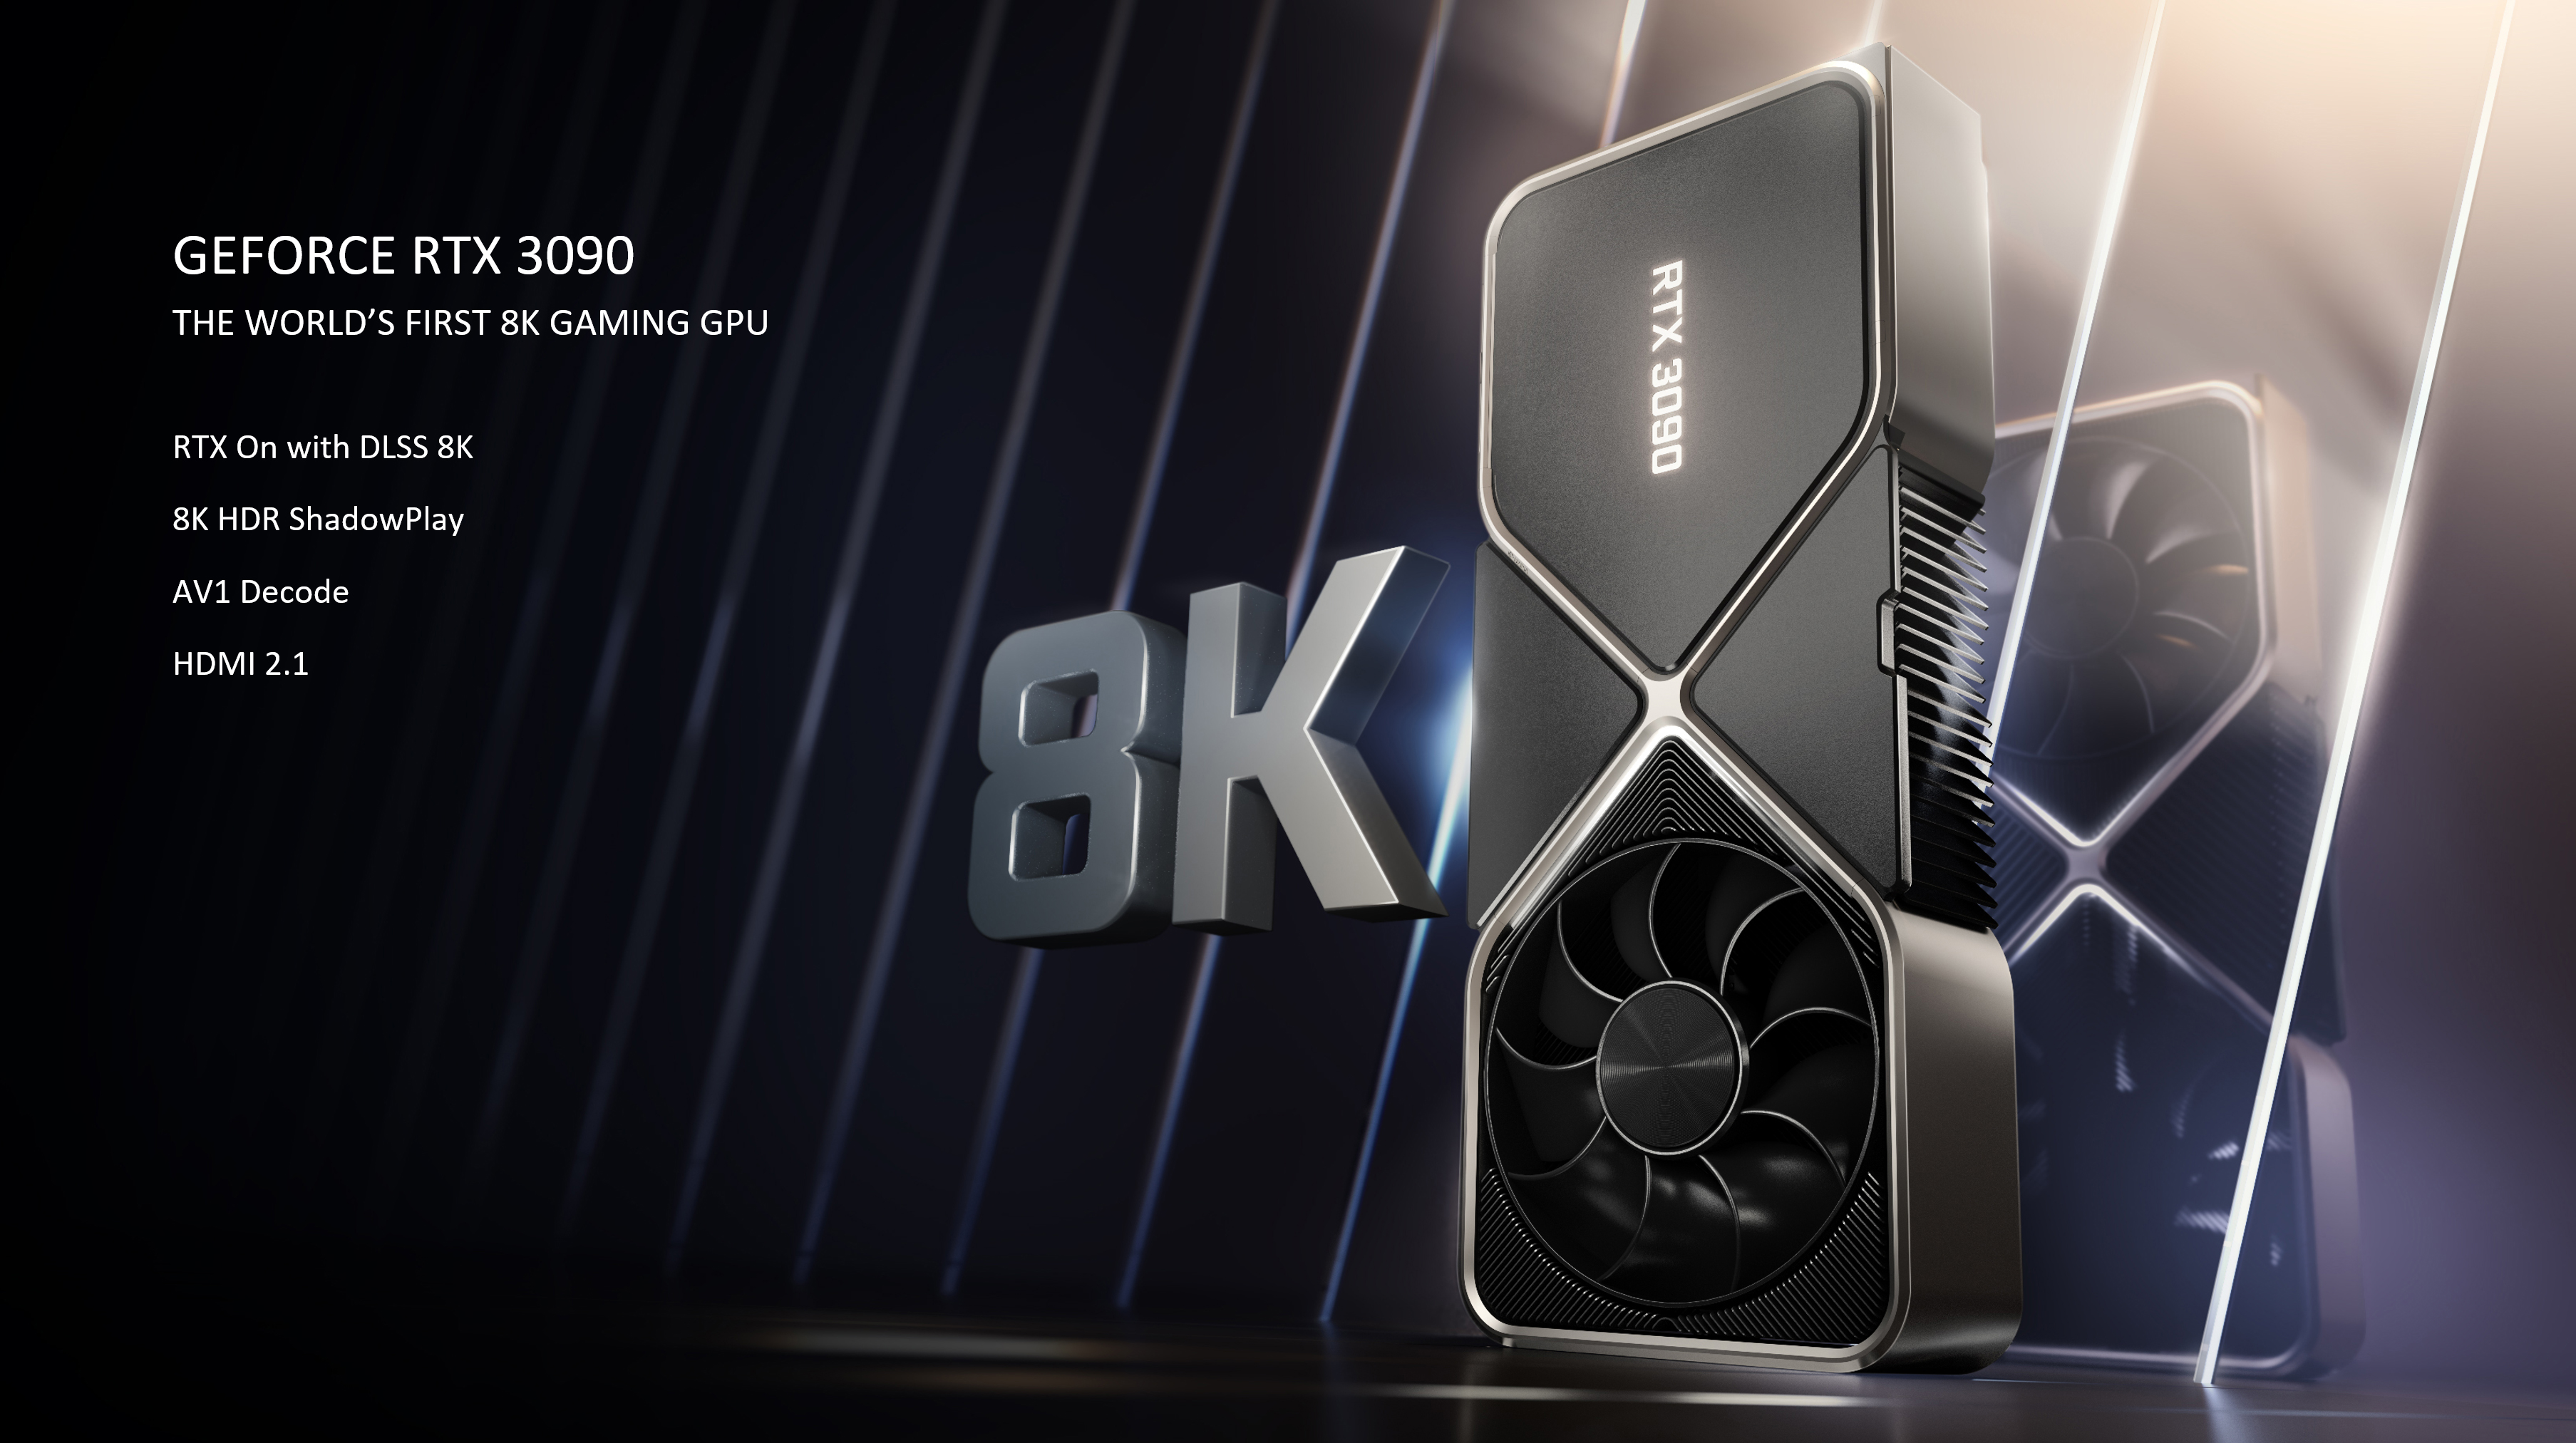 The New Pinnacle: 8K HDR Gaming Is Here With The GeForce RTX 3090 